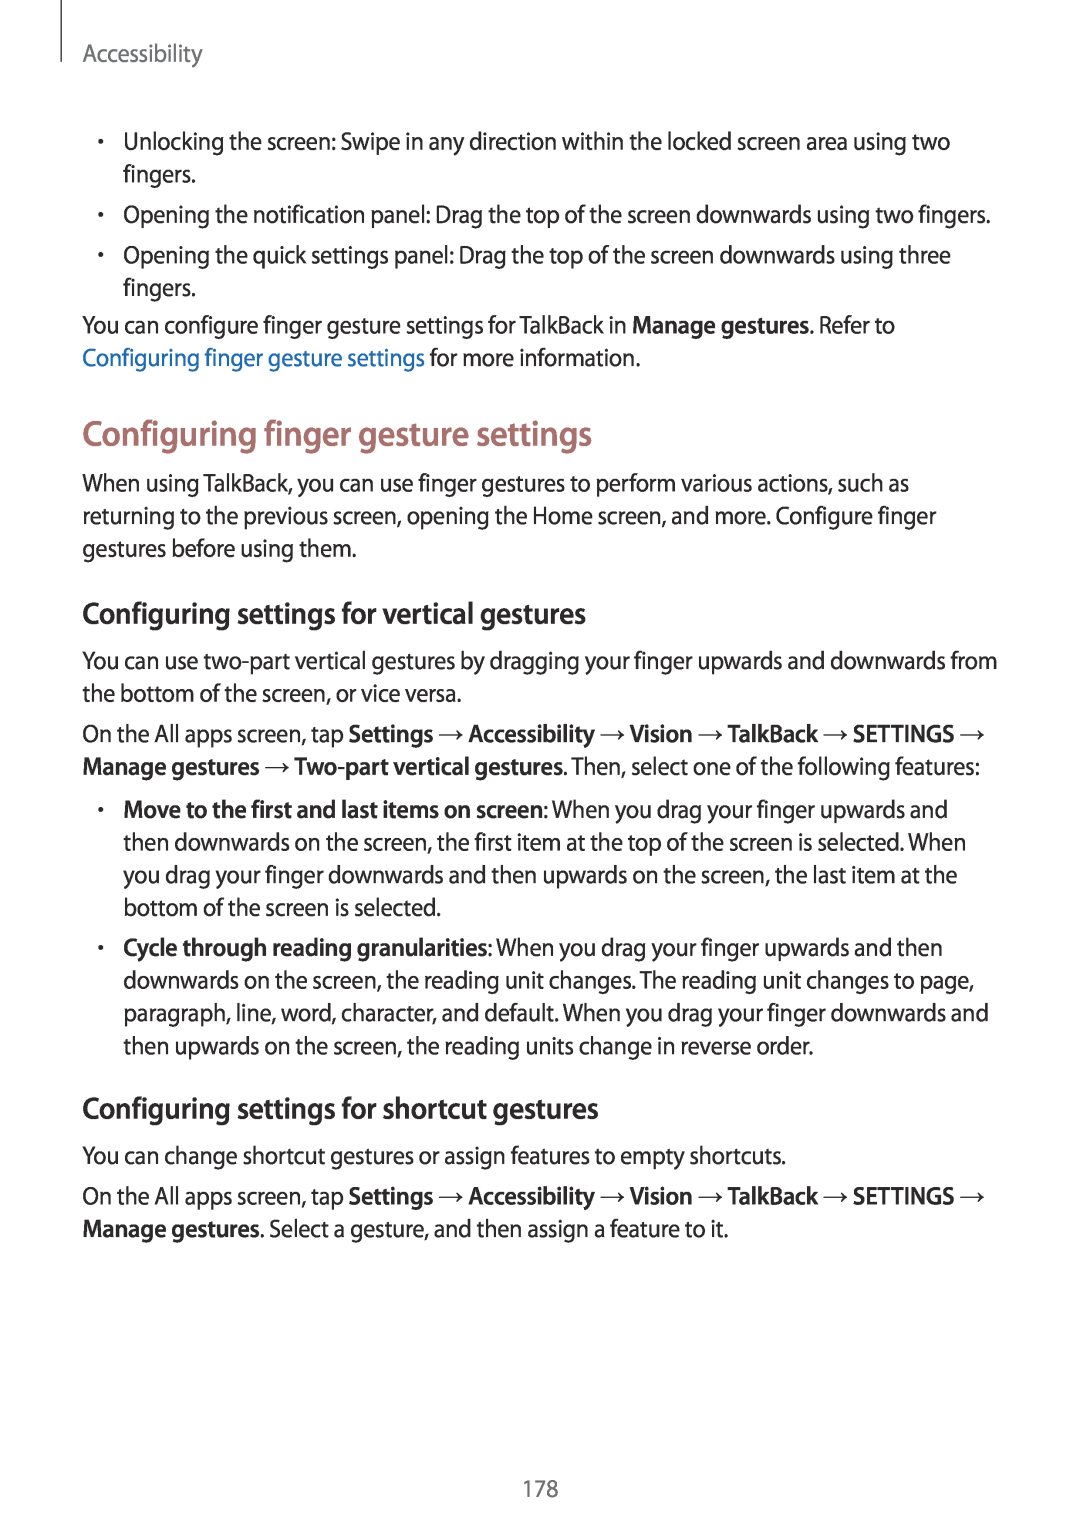 Samsung SM-N915FZWYAUT Configuring finger gesture settings, Configuring settings for vertical gestures, Accessibility 